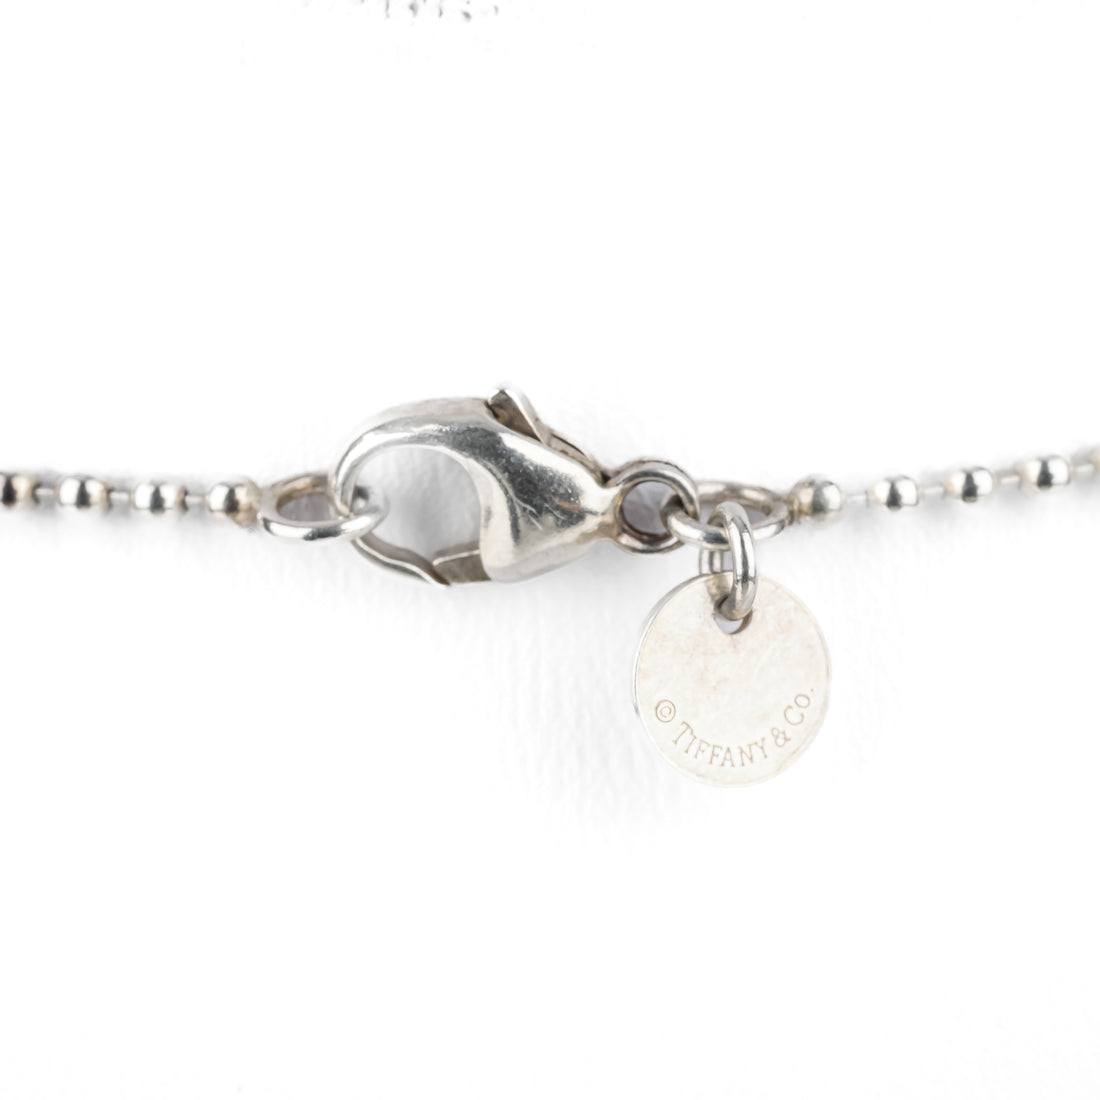 TIFFANY & CO Sterling 2 Heart Tag Bead Necklace